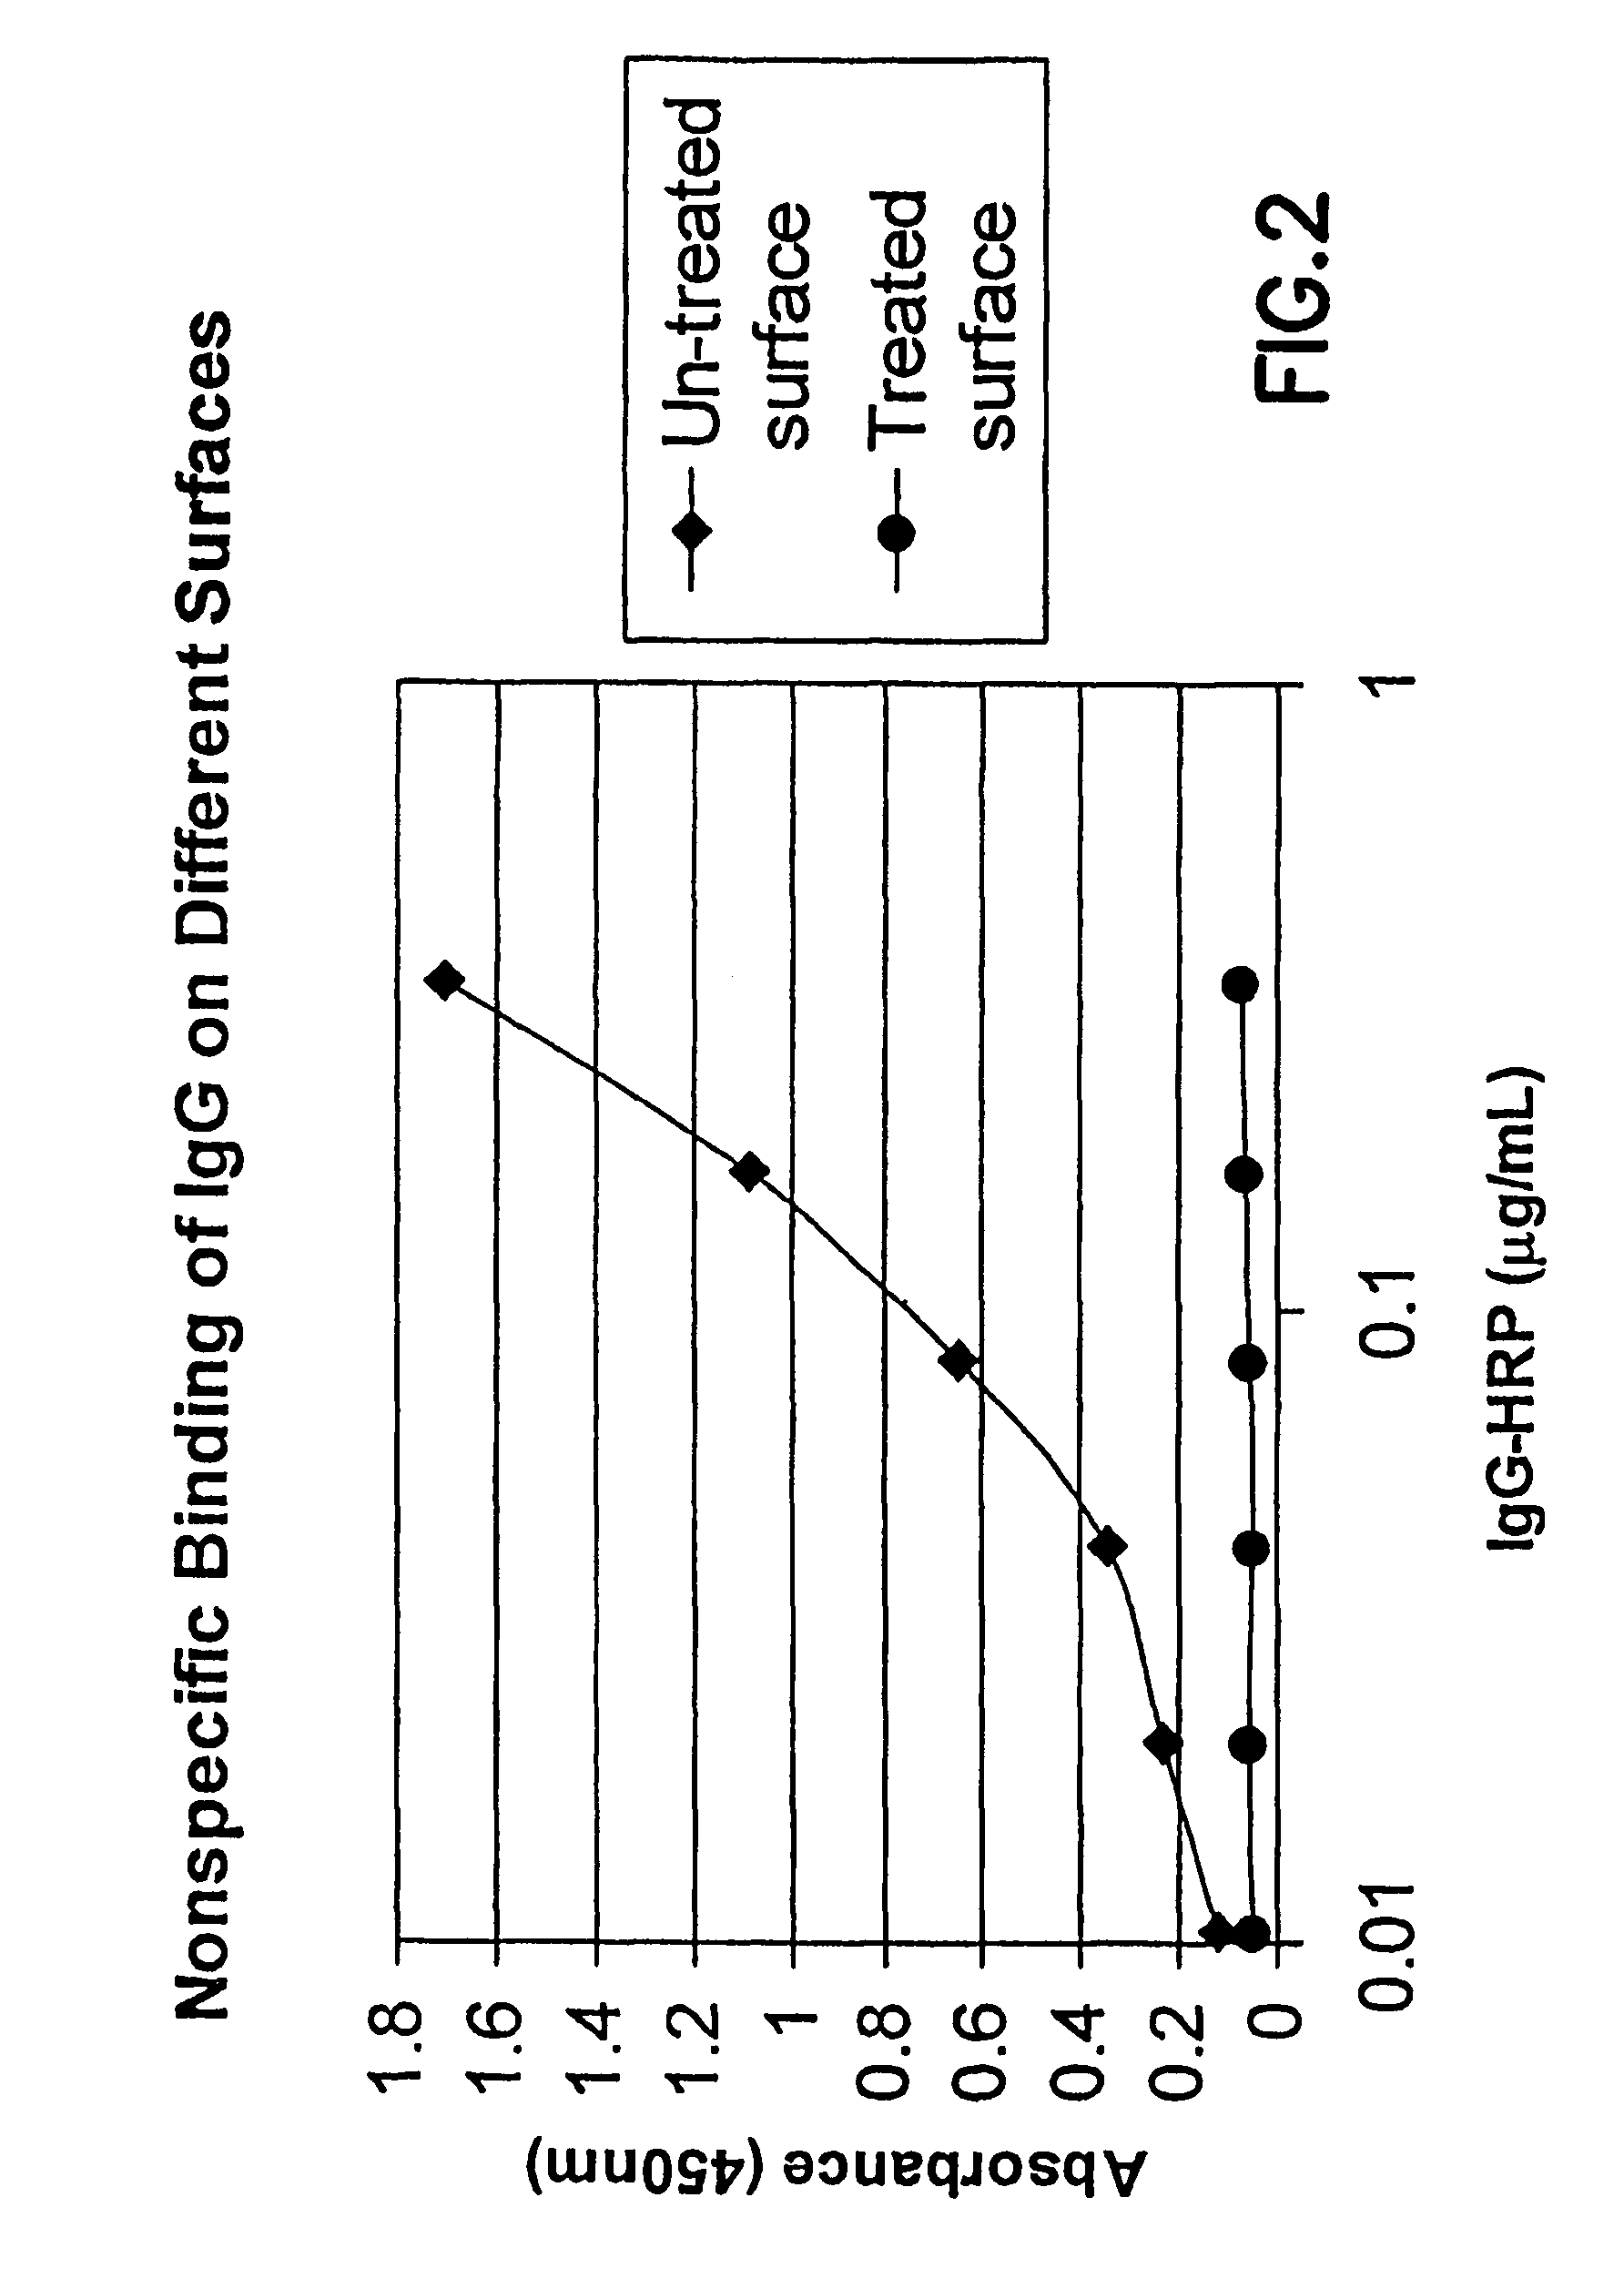 Methods for producing surfaces that resist non-specific protein binding and cell attachment